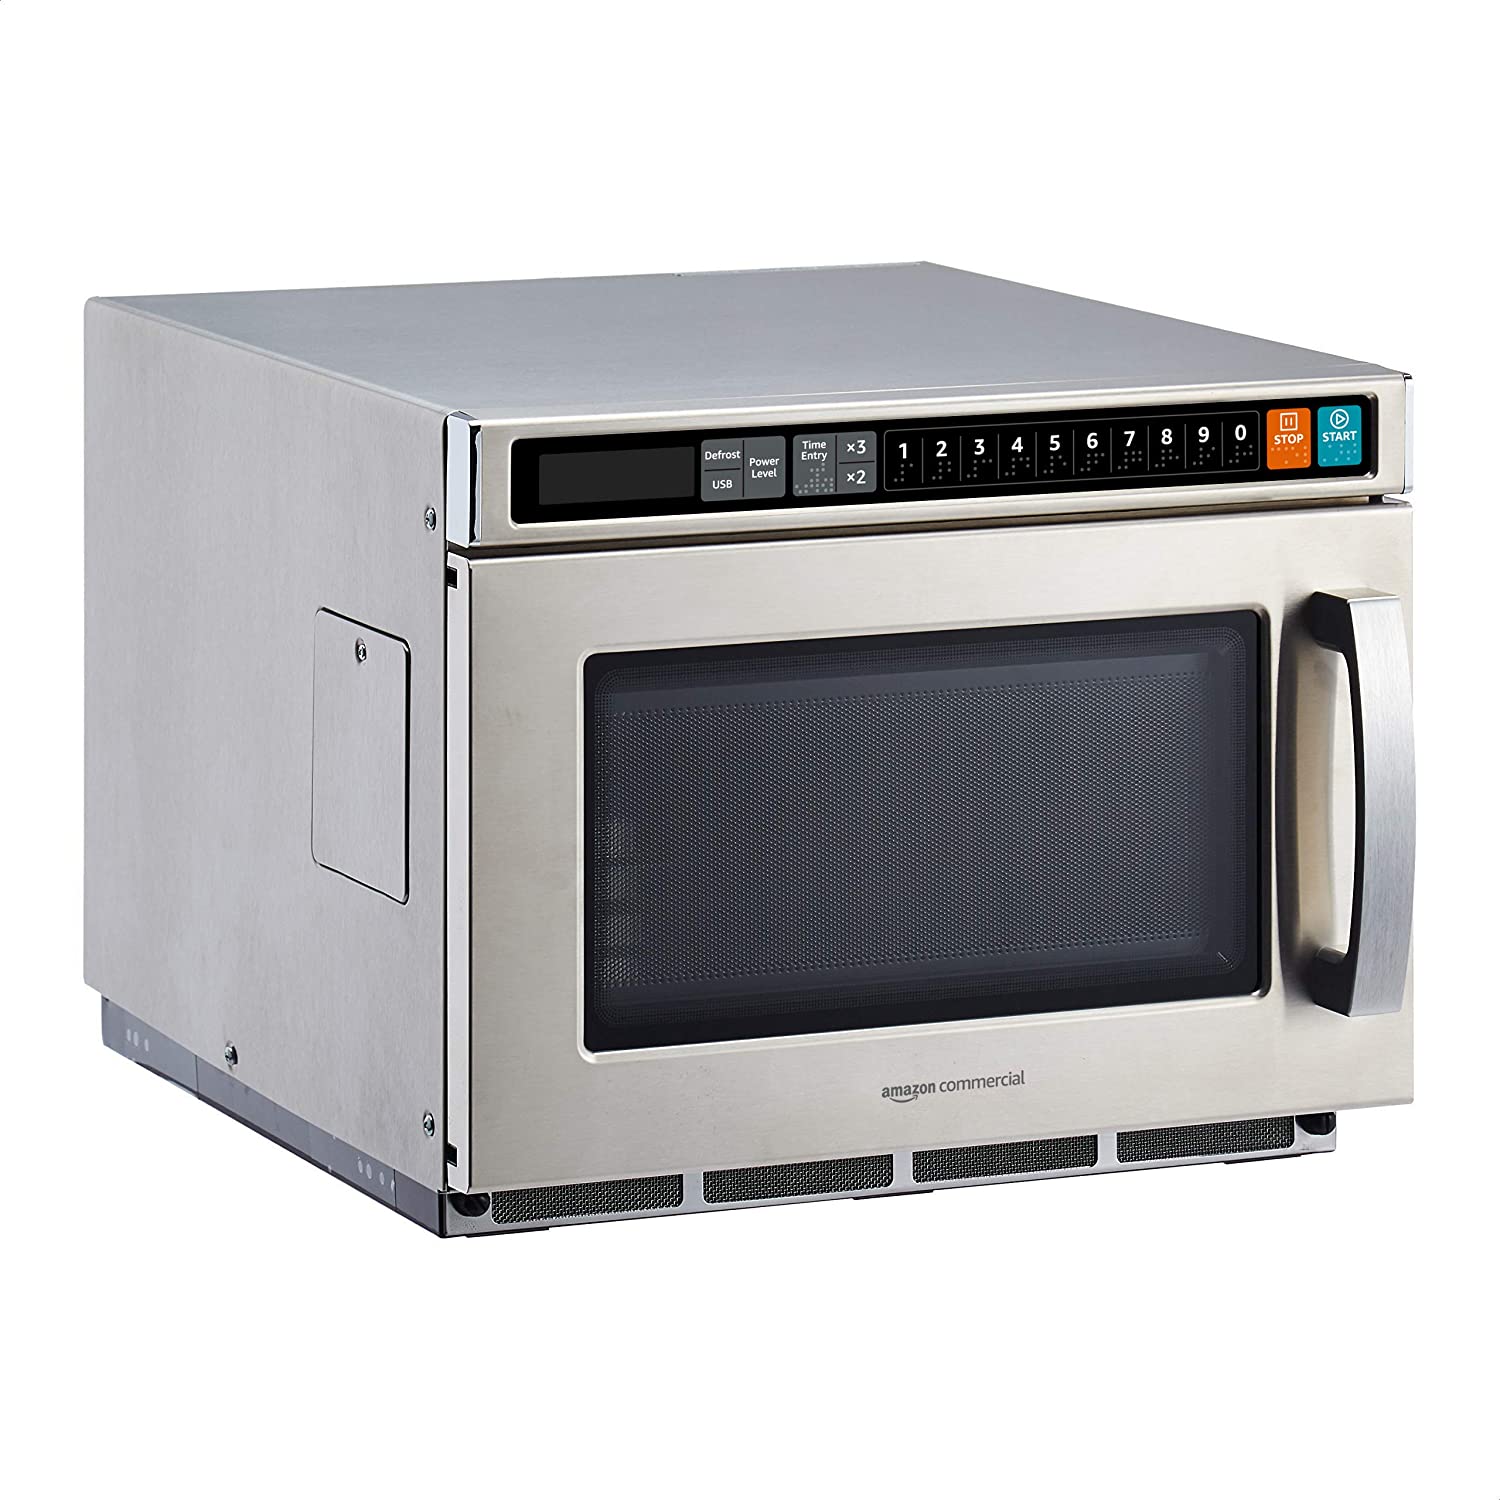 amazoncommercial-microwave